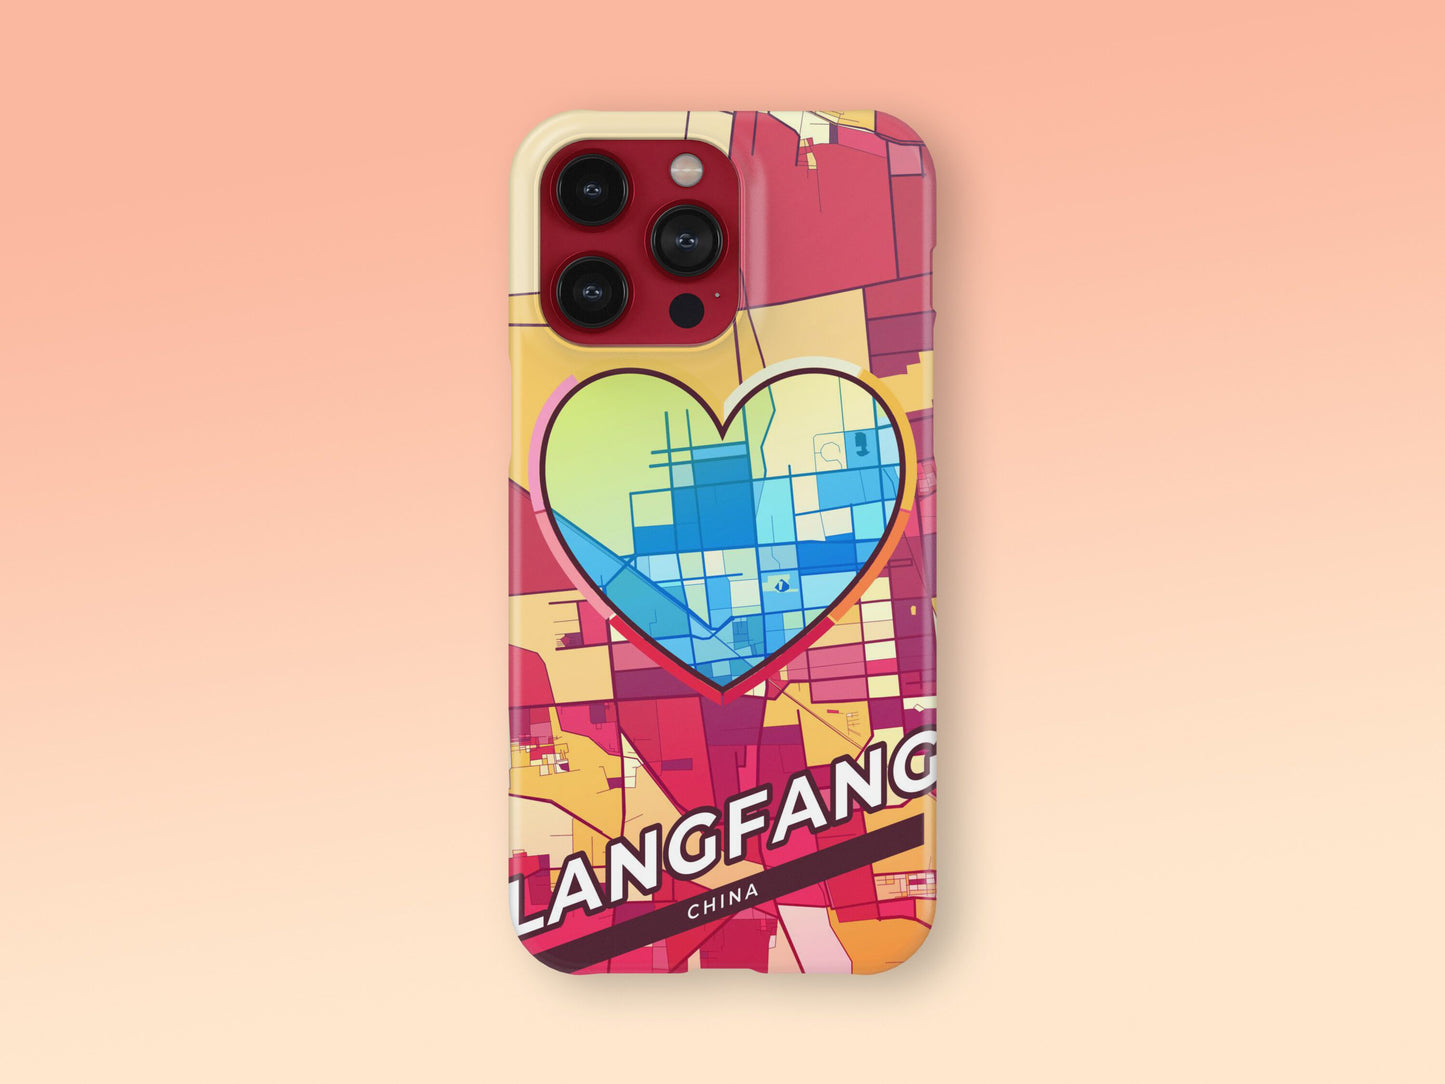 Langfang China slim phone case with colorful icon. Birthday, wedding or housewarming gift. Couple match cases. 2